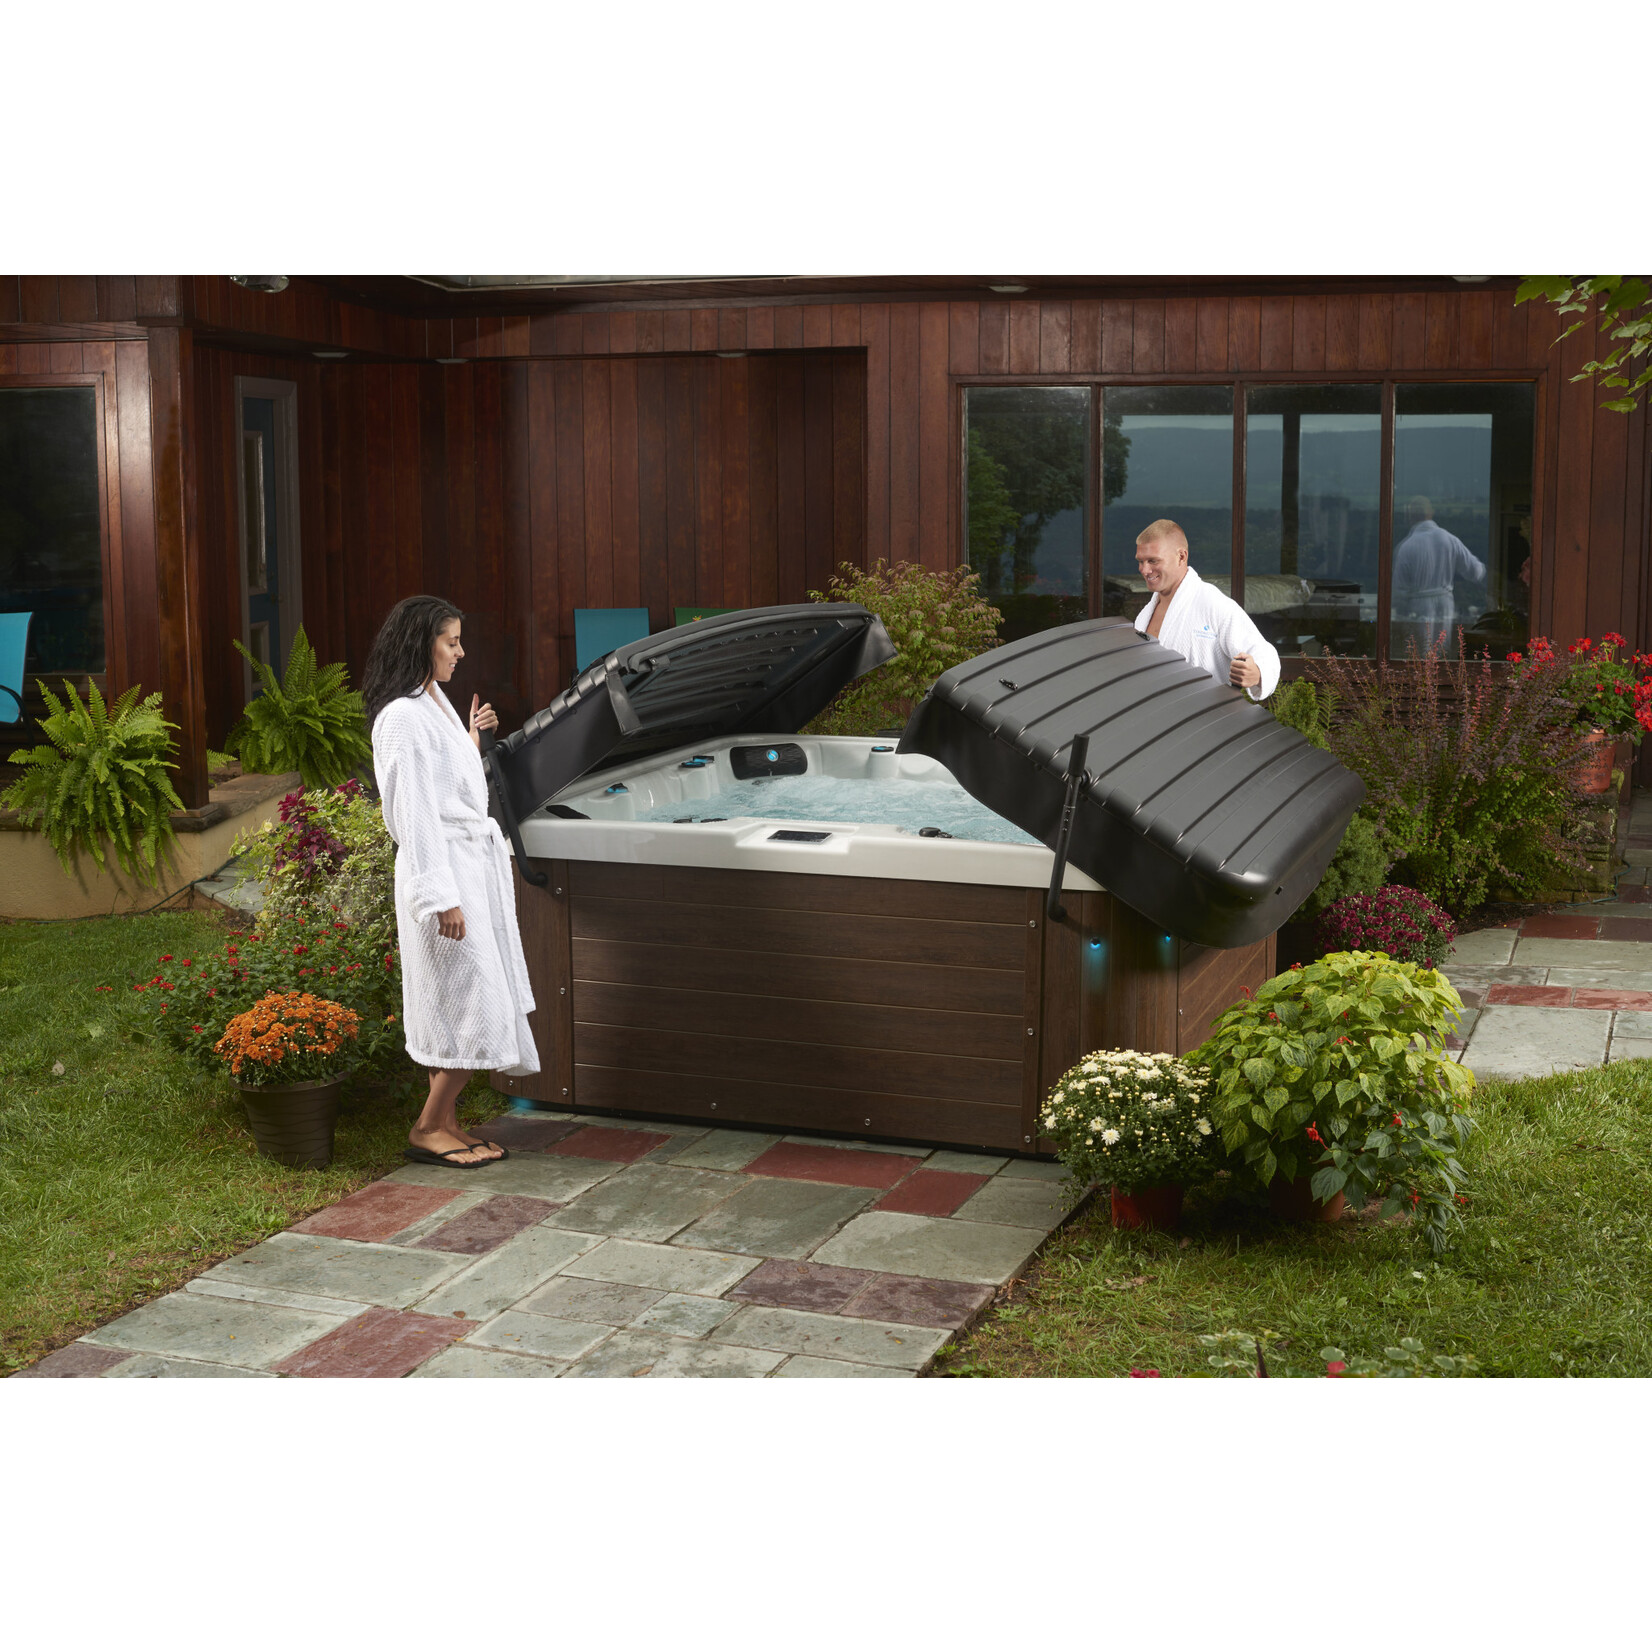 STRONG SPAS SUMMIT / S40 - WITH WIFI PACKAGE andcomes with --> ( Dura-shield hard cover, Dura-base, water columns LED lights, exterior cabinet led's led cup holders, spatouch full color touch screen